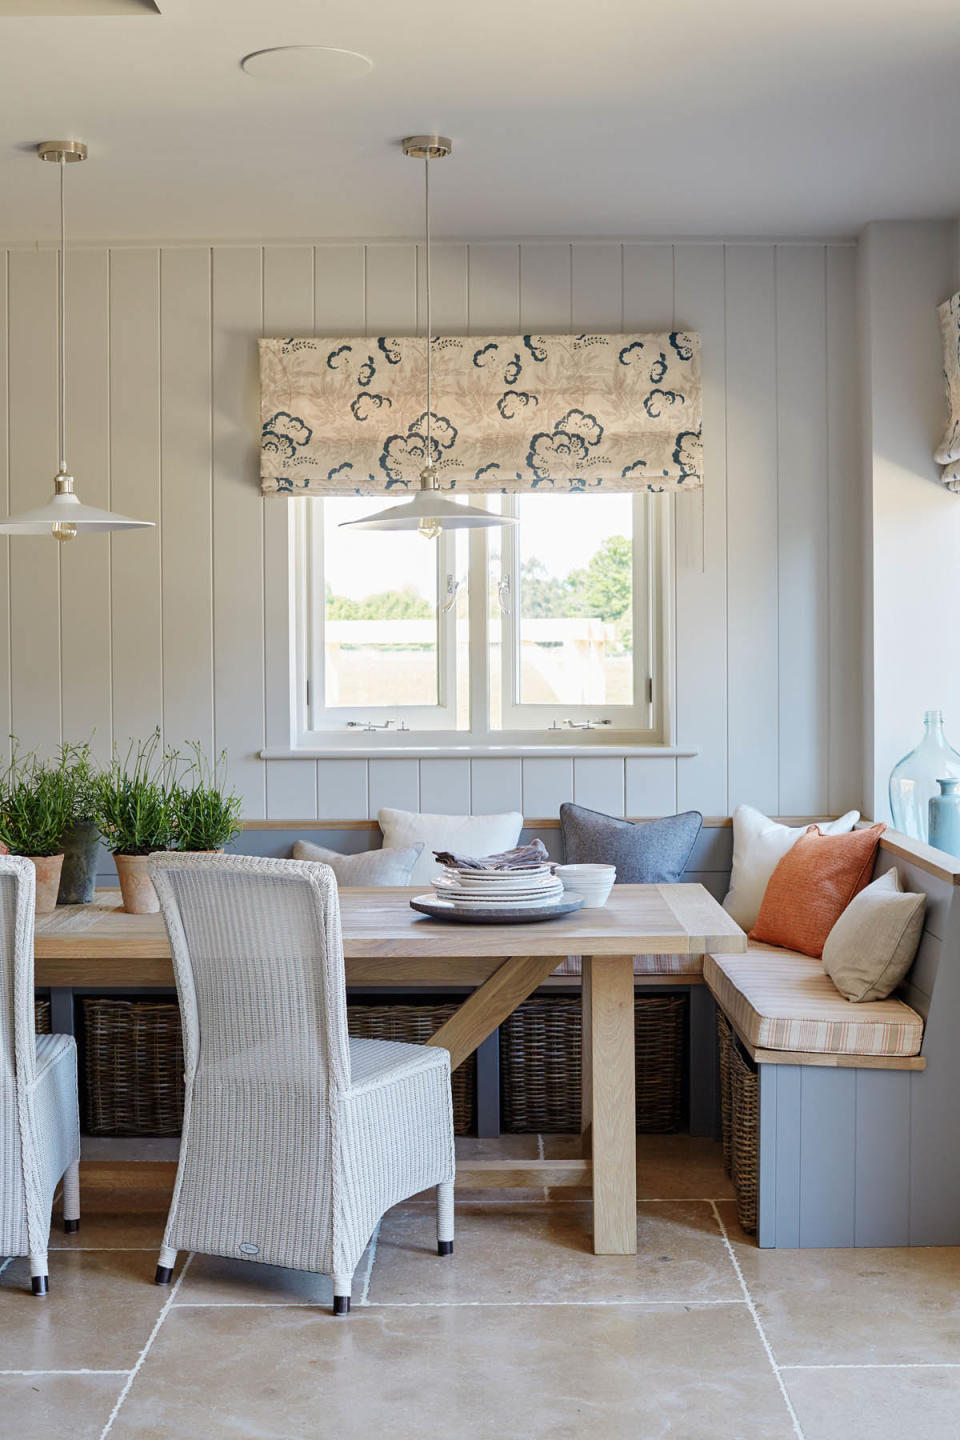 <p> 'Built-in seating is an informal style of dining that lends itself well to the relaxed nature of country kitchens,' says Graeme Smith, Head of Retail & Commercial Design at Life Kitchens.  </p> <p> It can also be a good space-saving design feature.  </p> <p> 'Whether it backs into a corner, island or peninsular, you are instantly saving on the space that you would usually need behind traditional chairs,' confirms Smith. 'Without designated seats, you can usually fit more people around the table, too.' </p>